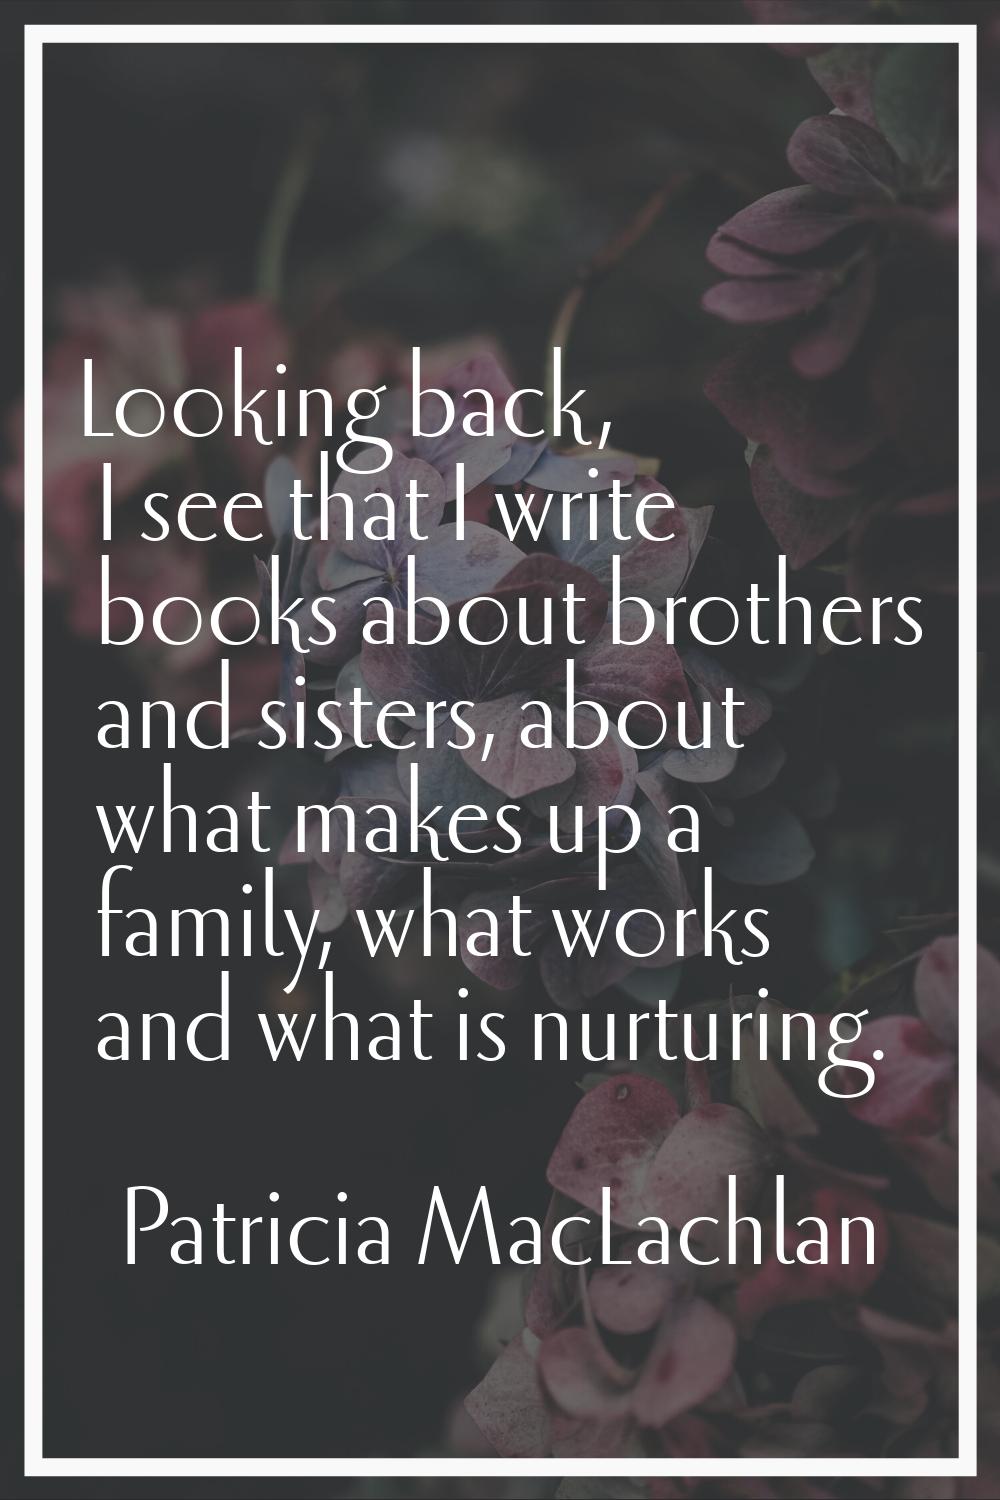 Looking back, I see that I write books about brothers and sisters, about what makes up a family, wh